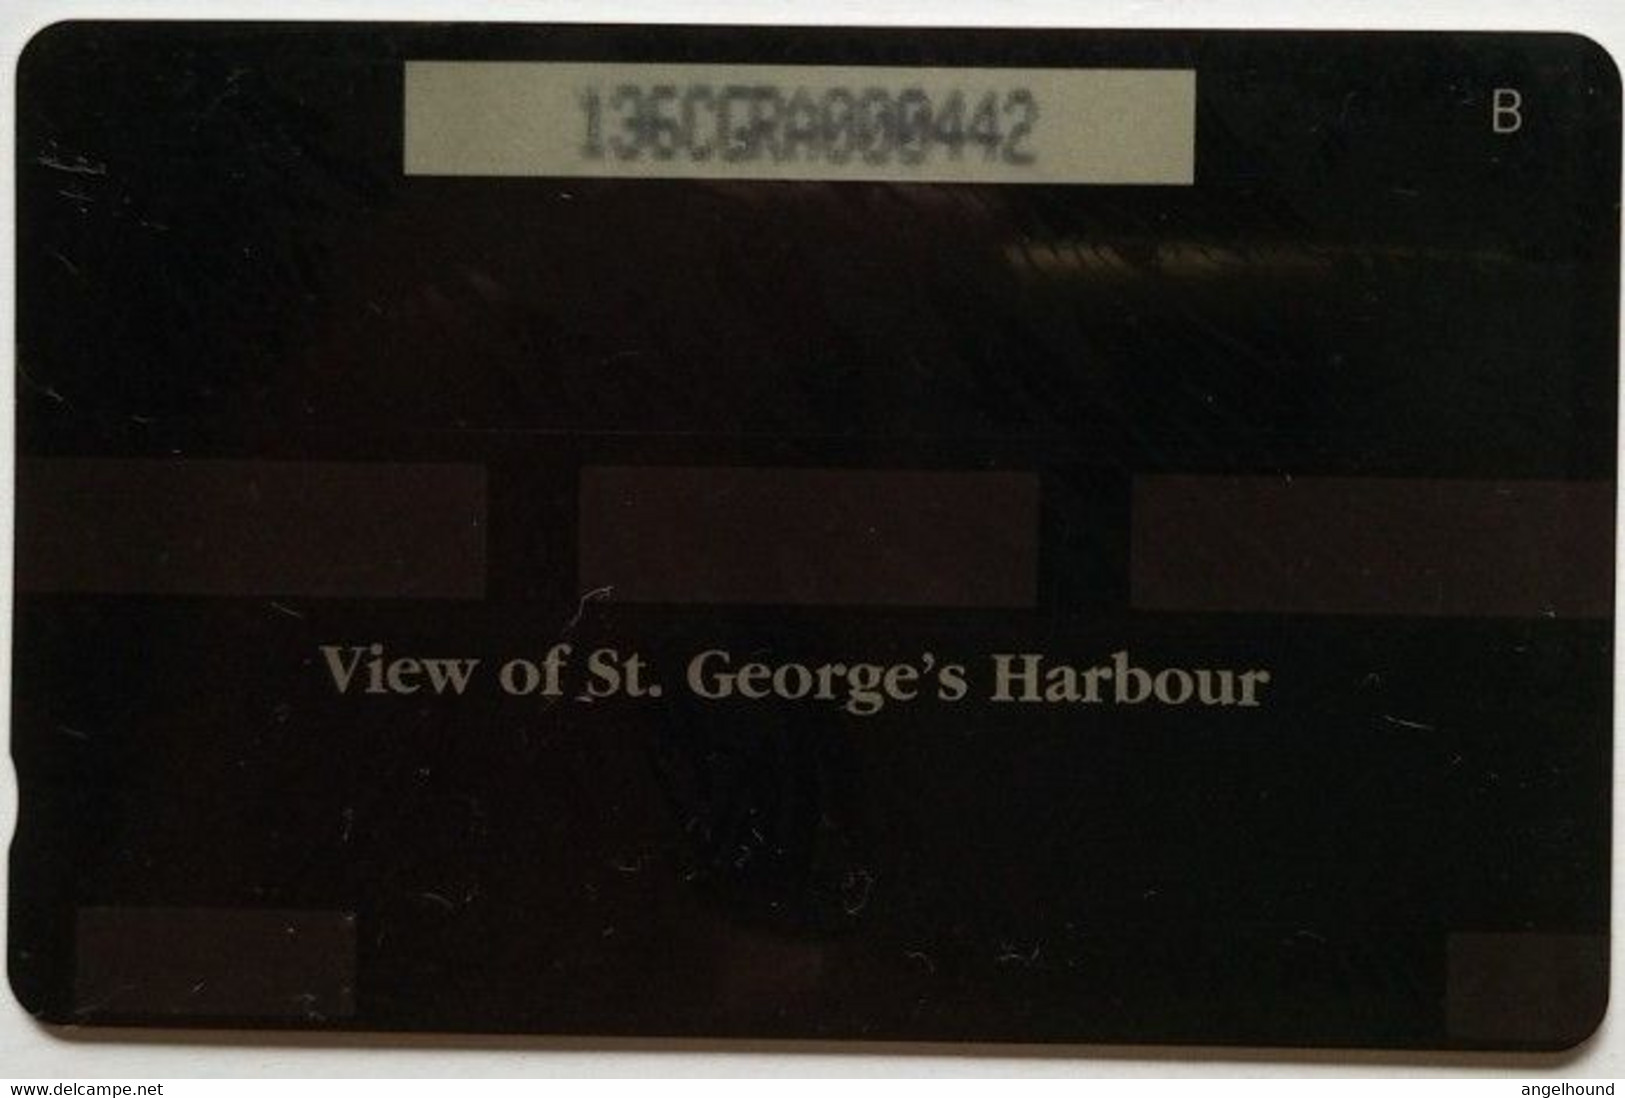 Grenada Cable And Wireless US$10 136CGRA " View Of St. George Harbour" - Grenada (Granada)